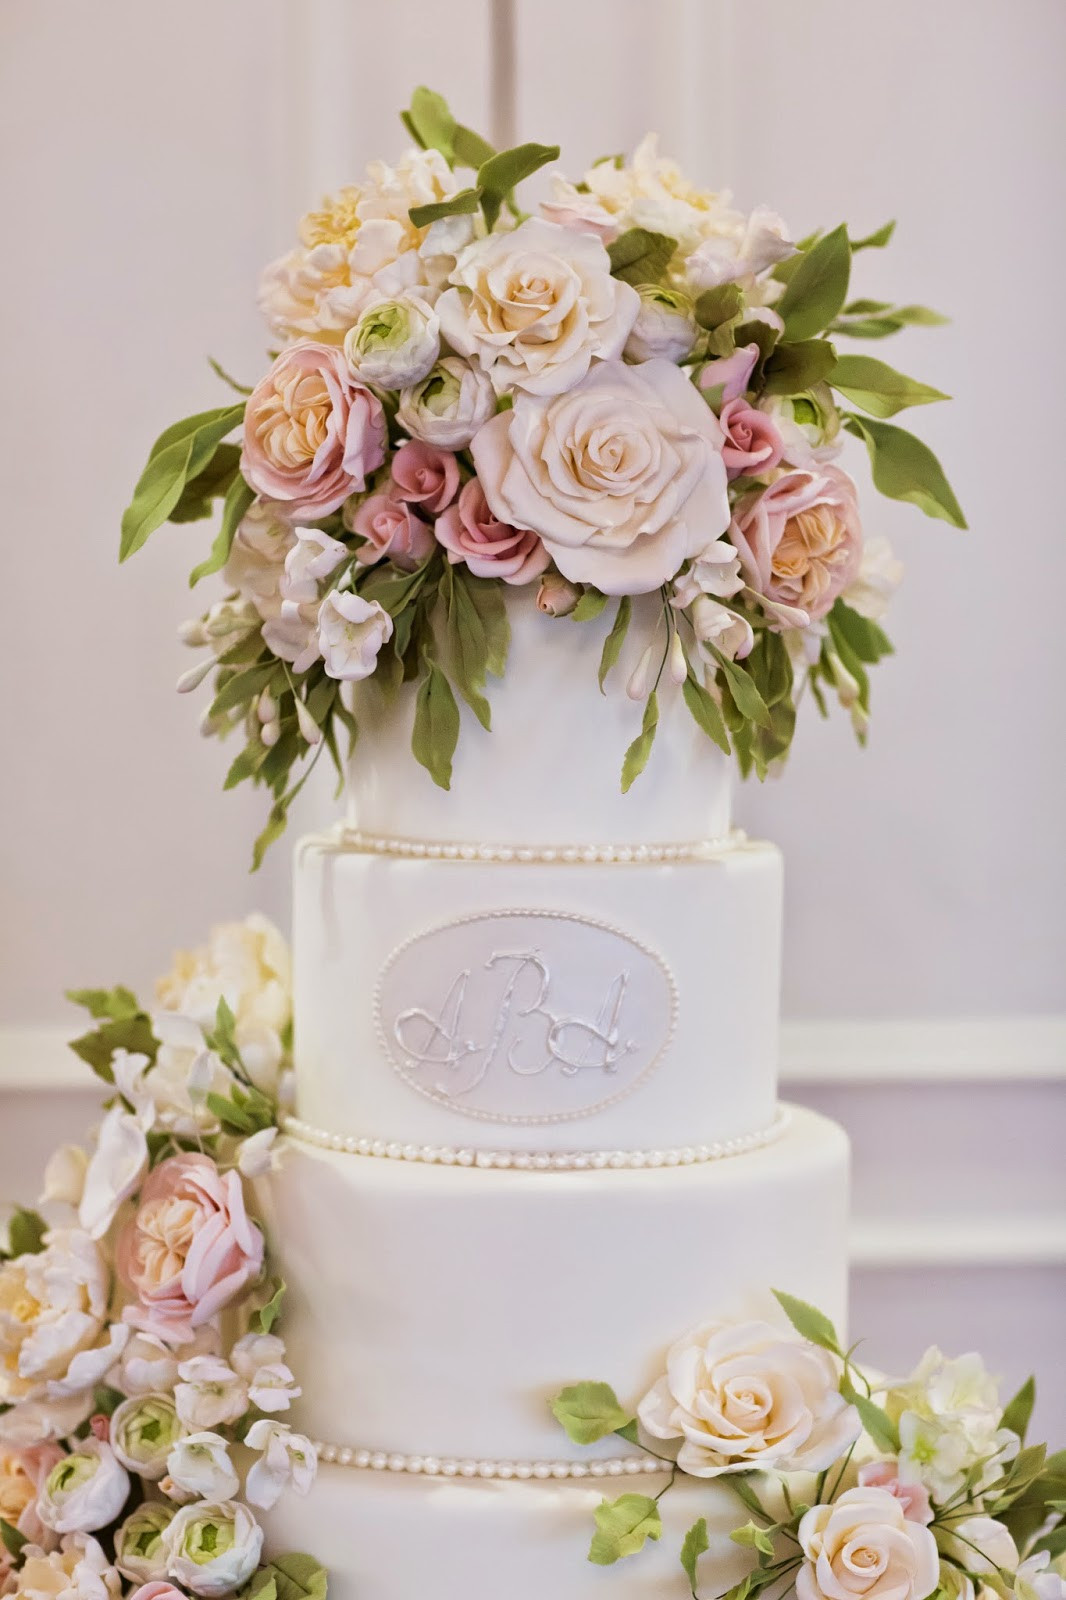 Sugar Flowers For Wedding Cakes
 For the Love of Cake by Garry & Ana Parzych November 2014